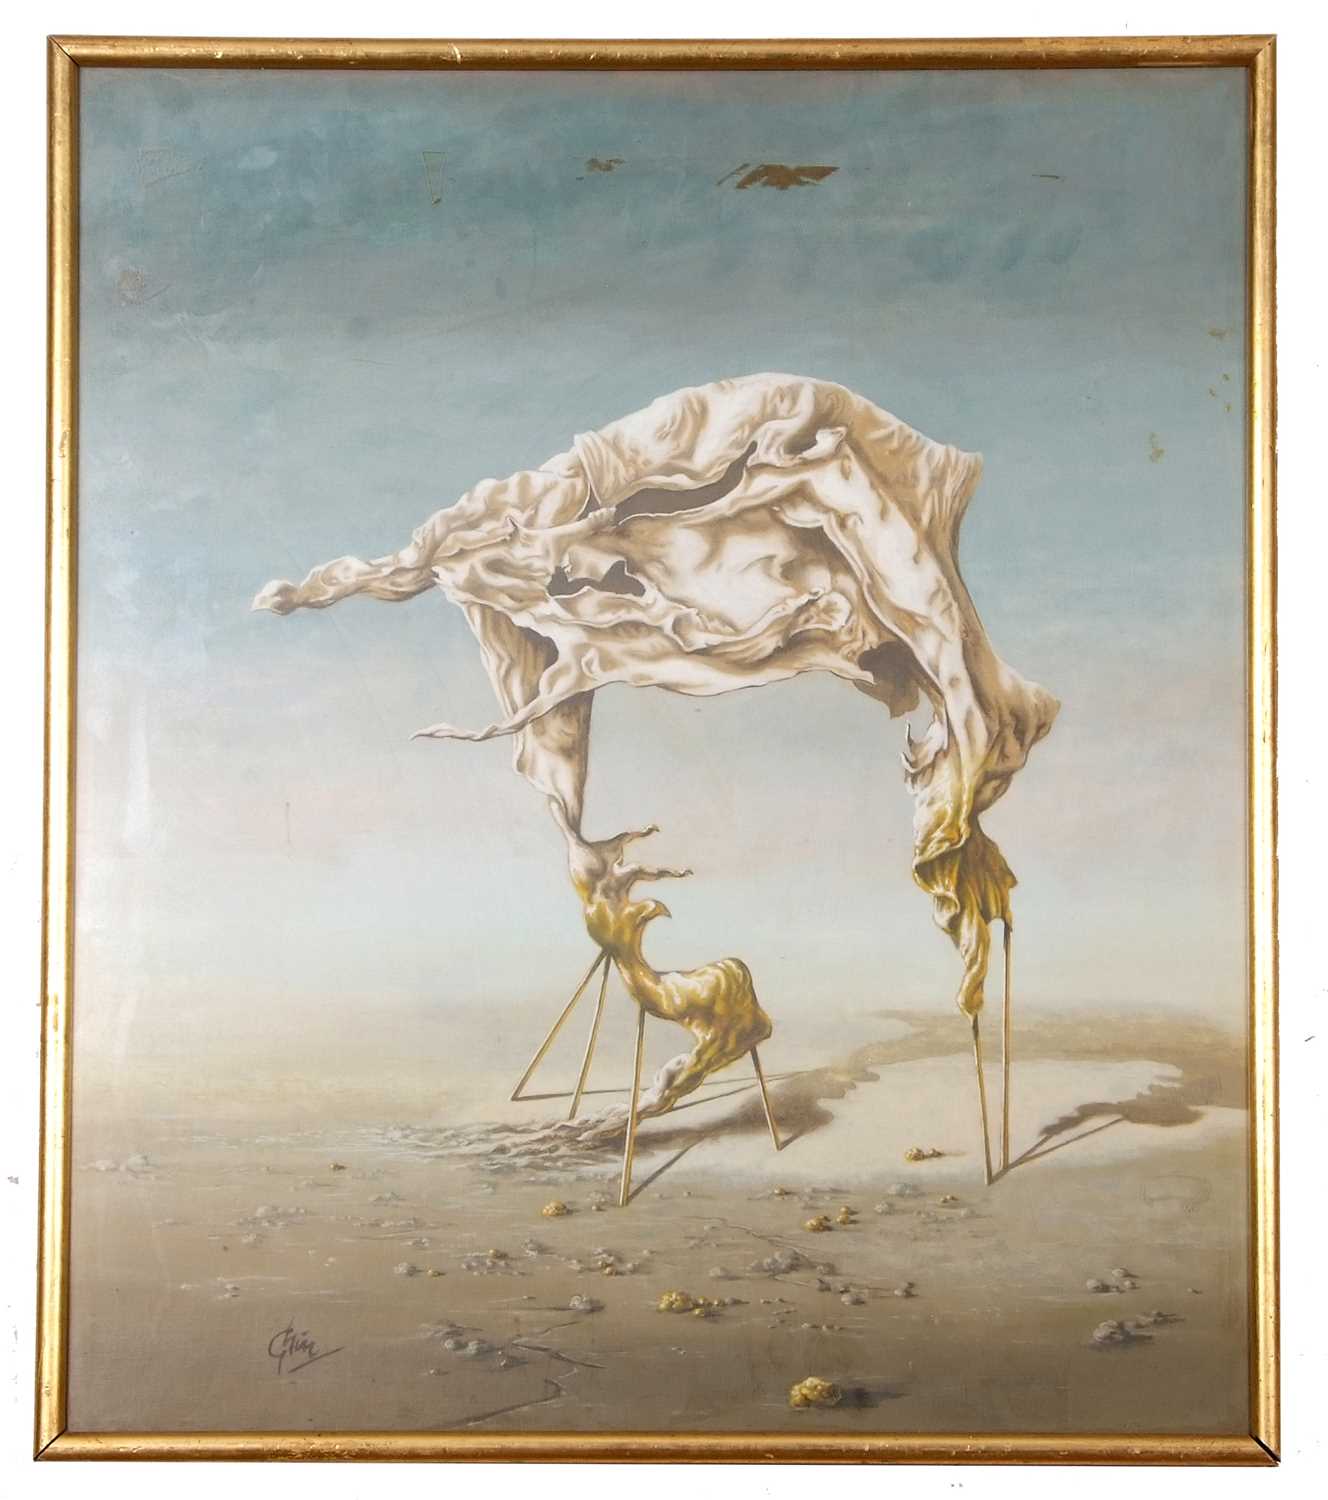 Geoffrey Ghin (British, contemporary) after Salvador Dali, "Achilles" oil on board, signed, 55x64cm,